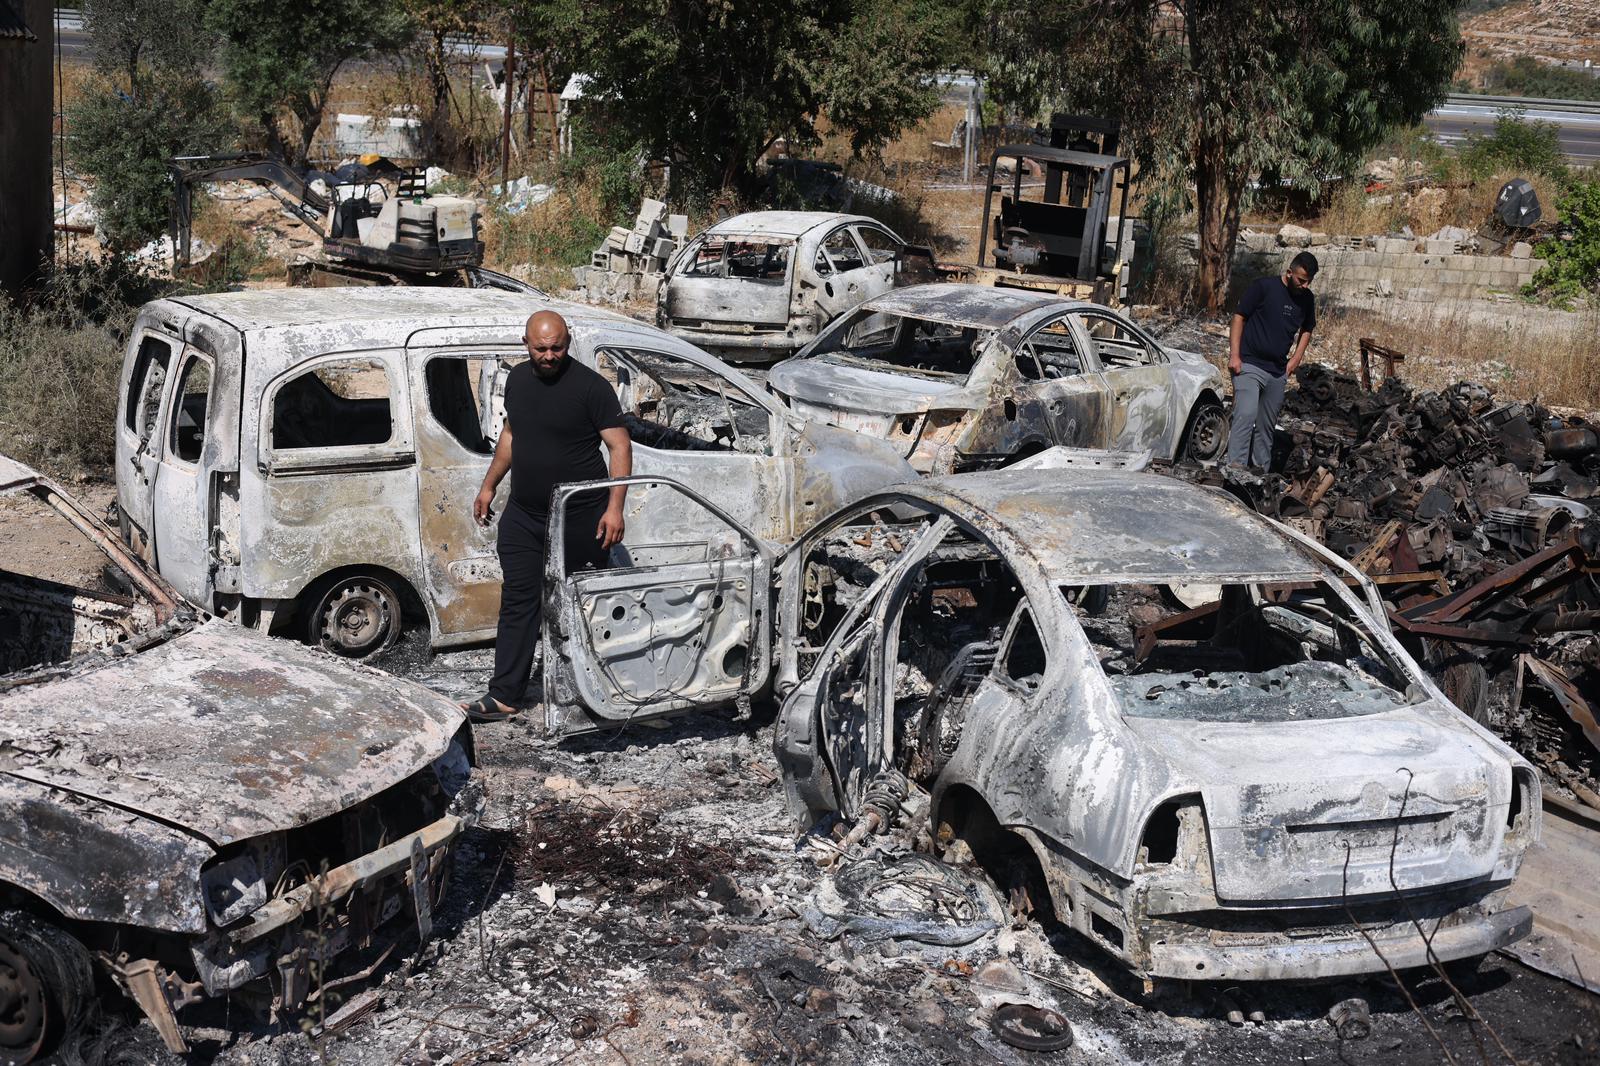 Palestinians asses the damage after settlers burned cars and damaged property in the West Bank village of Al-Lubban ash-Sharqiya, June 21, 2023. (Oren Ziv)